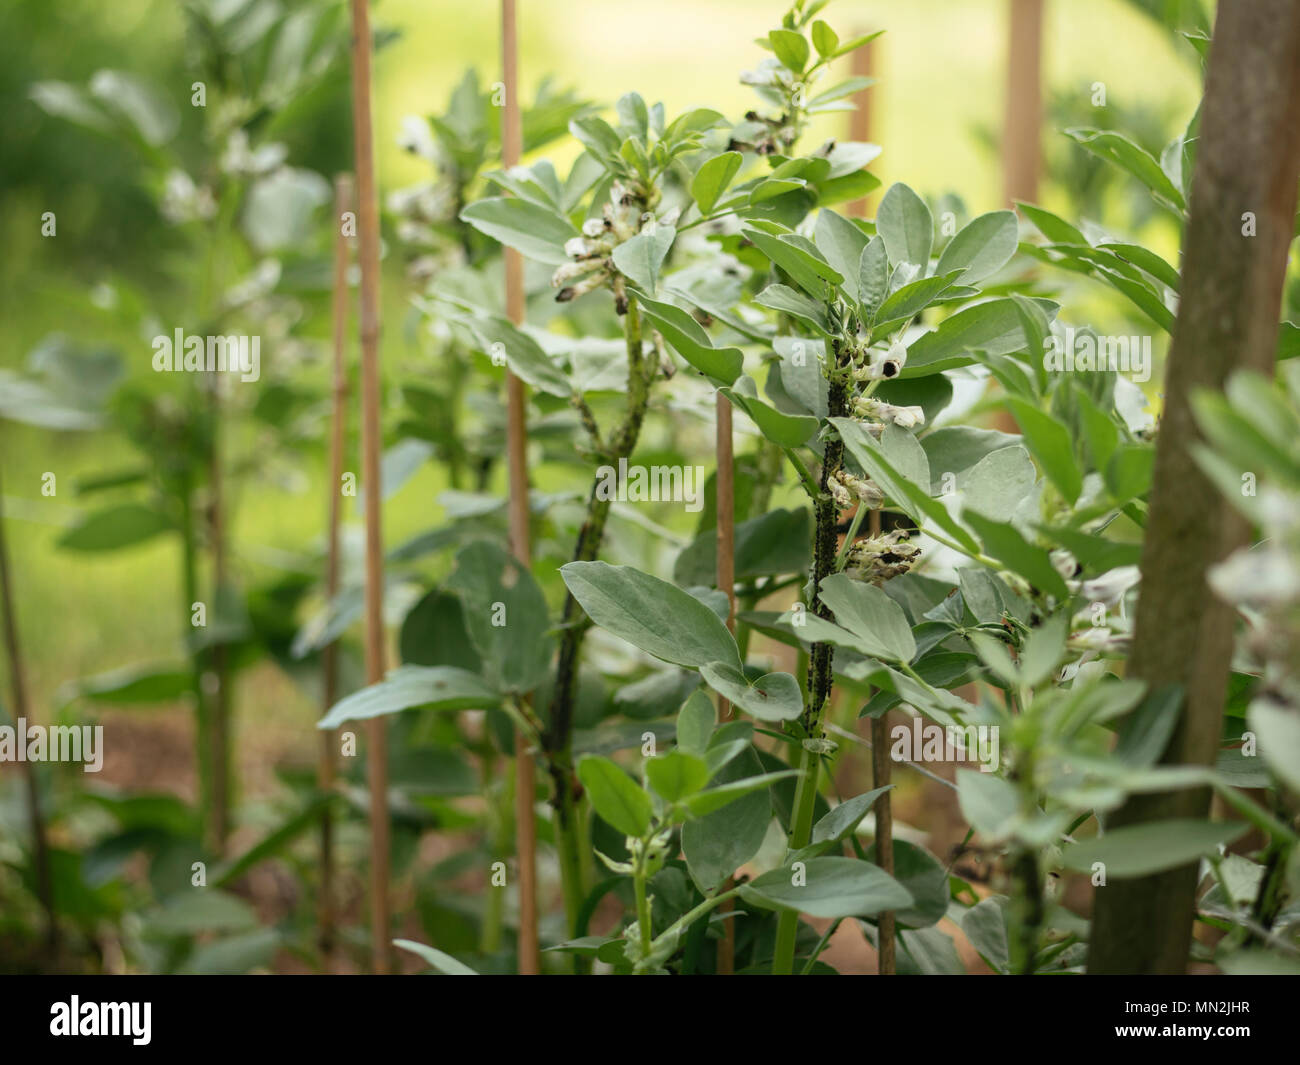 Fava bean plants invested with aphids Stock Photo